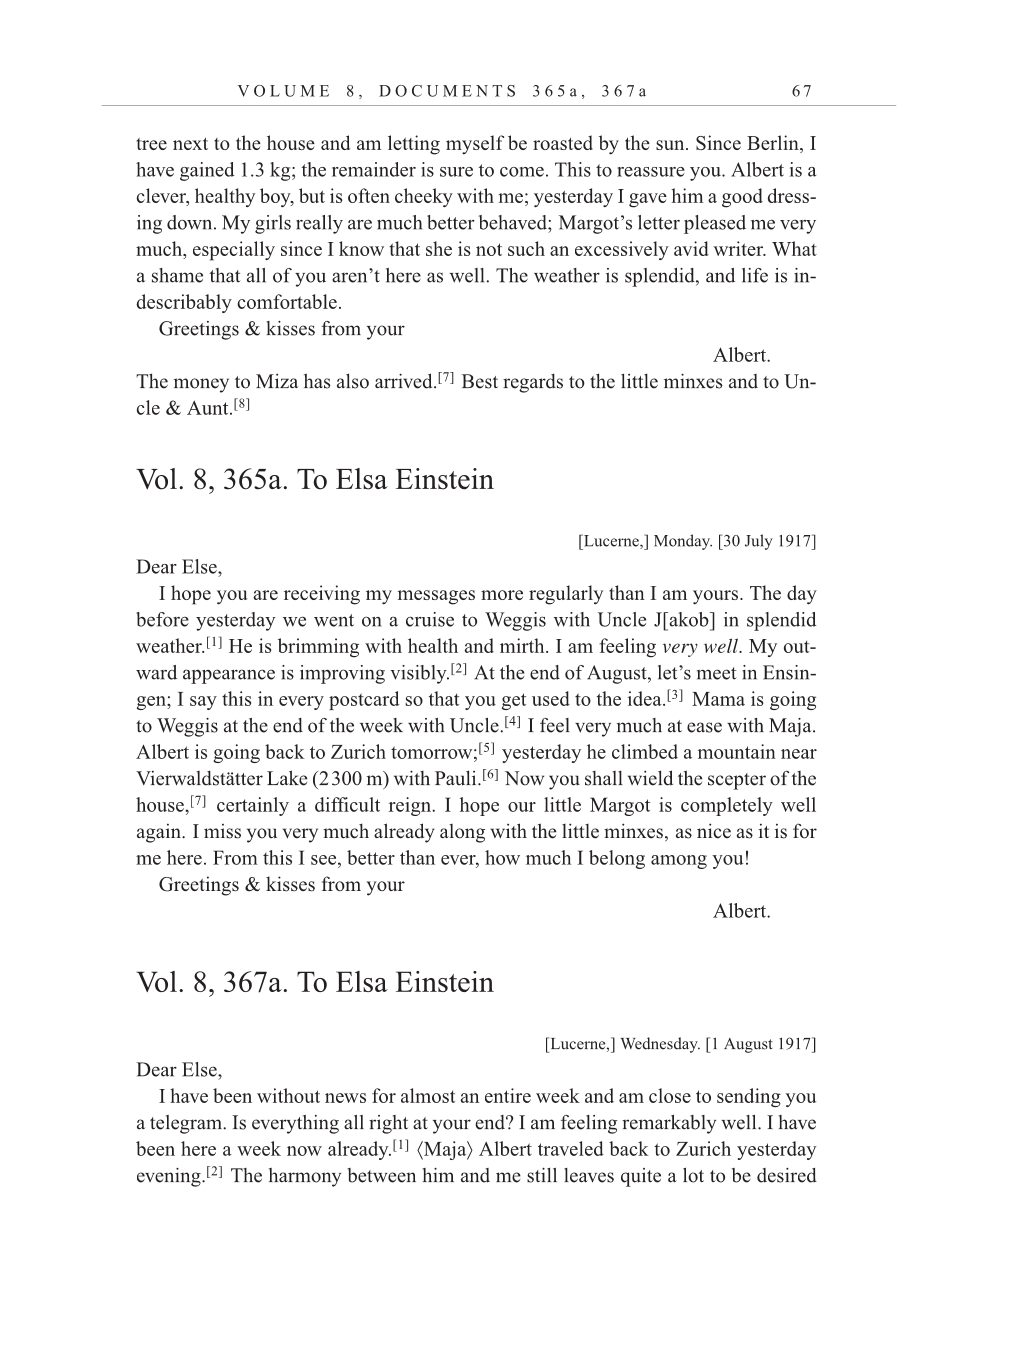 Volume 10: The Berlin Years: Correspondence, May-December 1920, and Supplementary Correspondence, 1909-1920 (English translation supplement) page 67